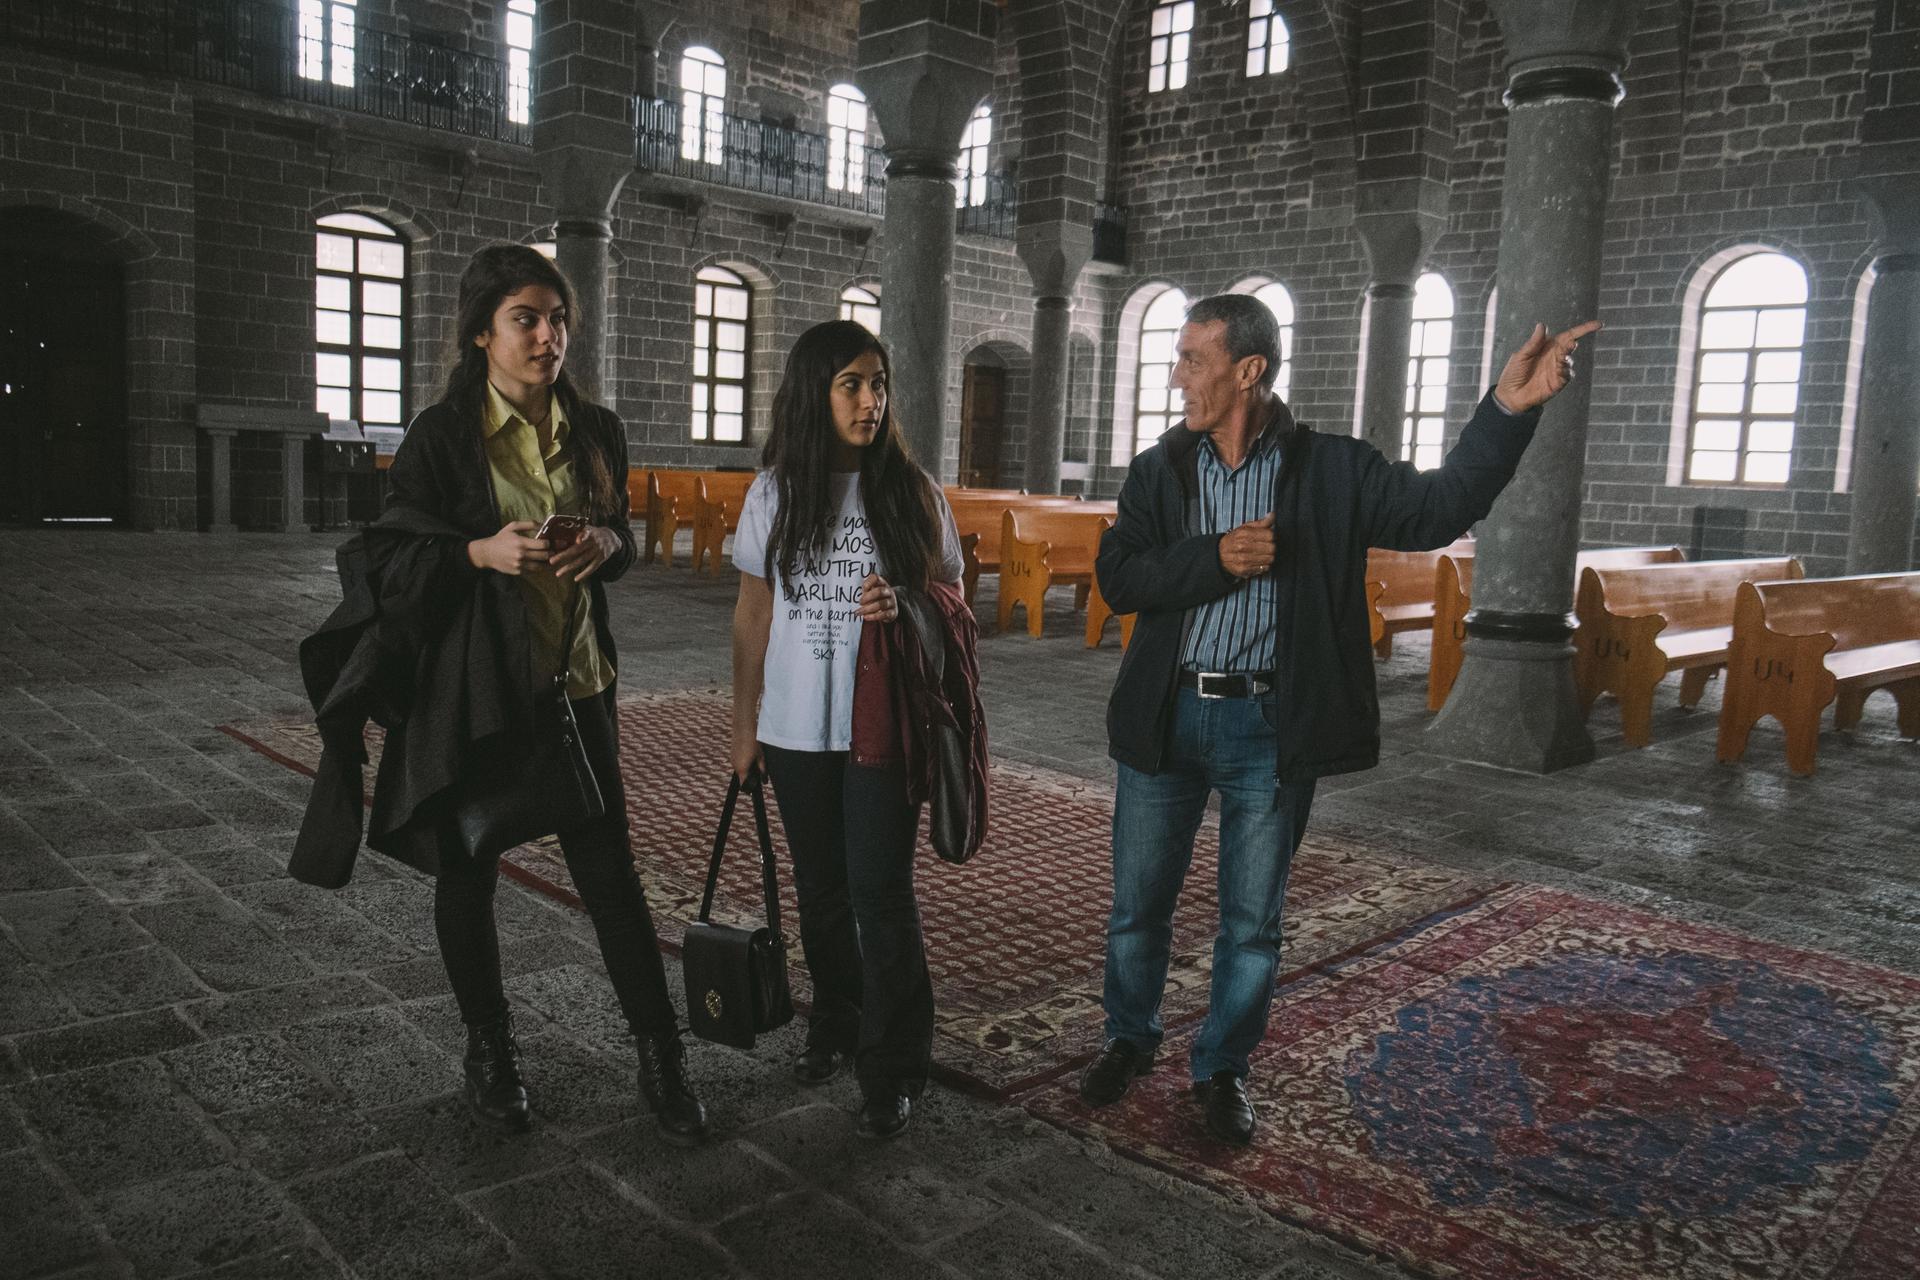 Ermen Demircian, caretaker of the Surp Giragos Armenian church in Diyarbakir, guides visitors during the lead up to the centennial memorial of the genocide.